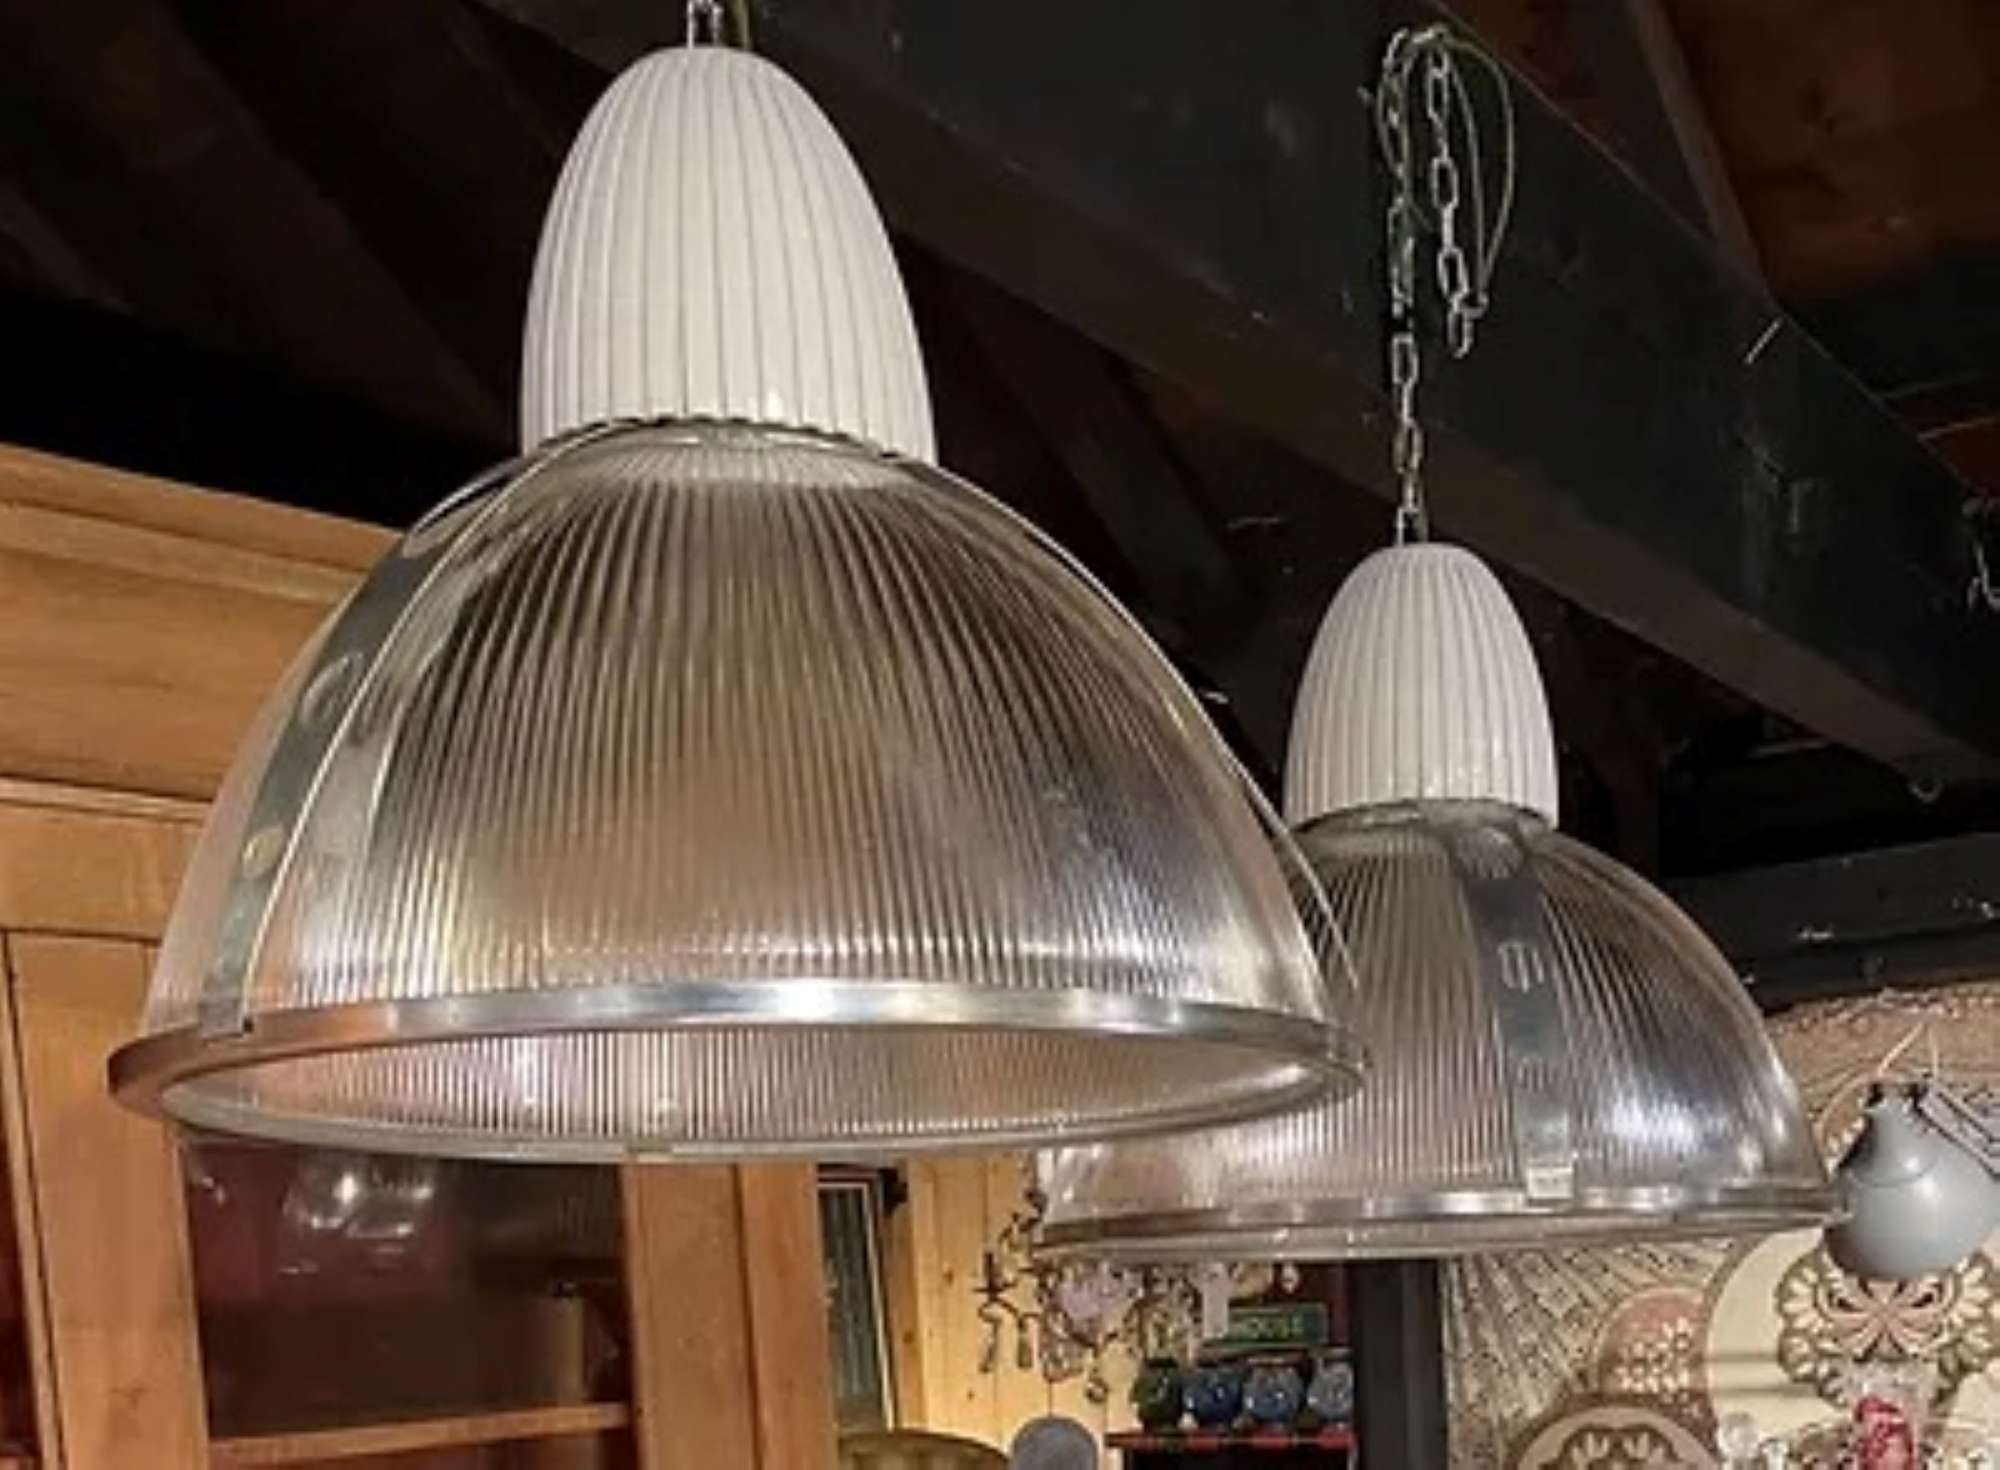 A Set Of Three Large Hanging Pendant Lamps From The Concorde Factory